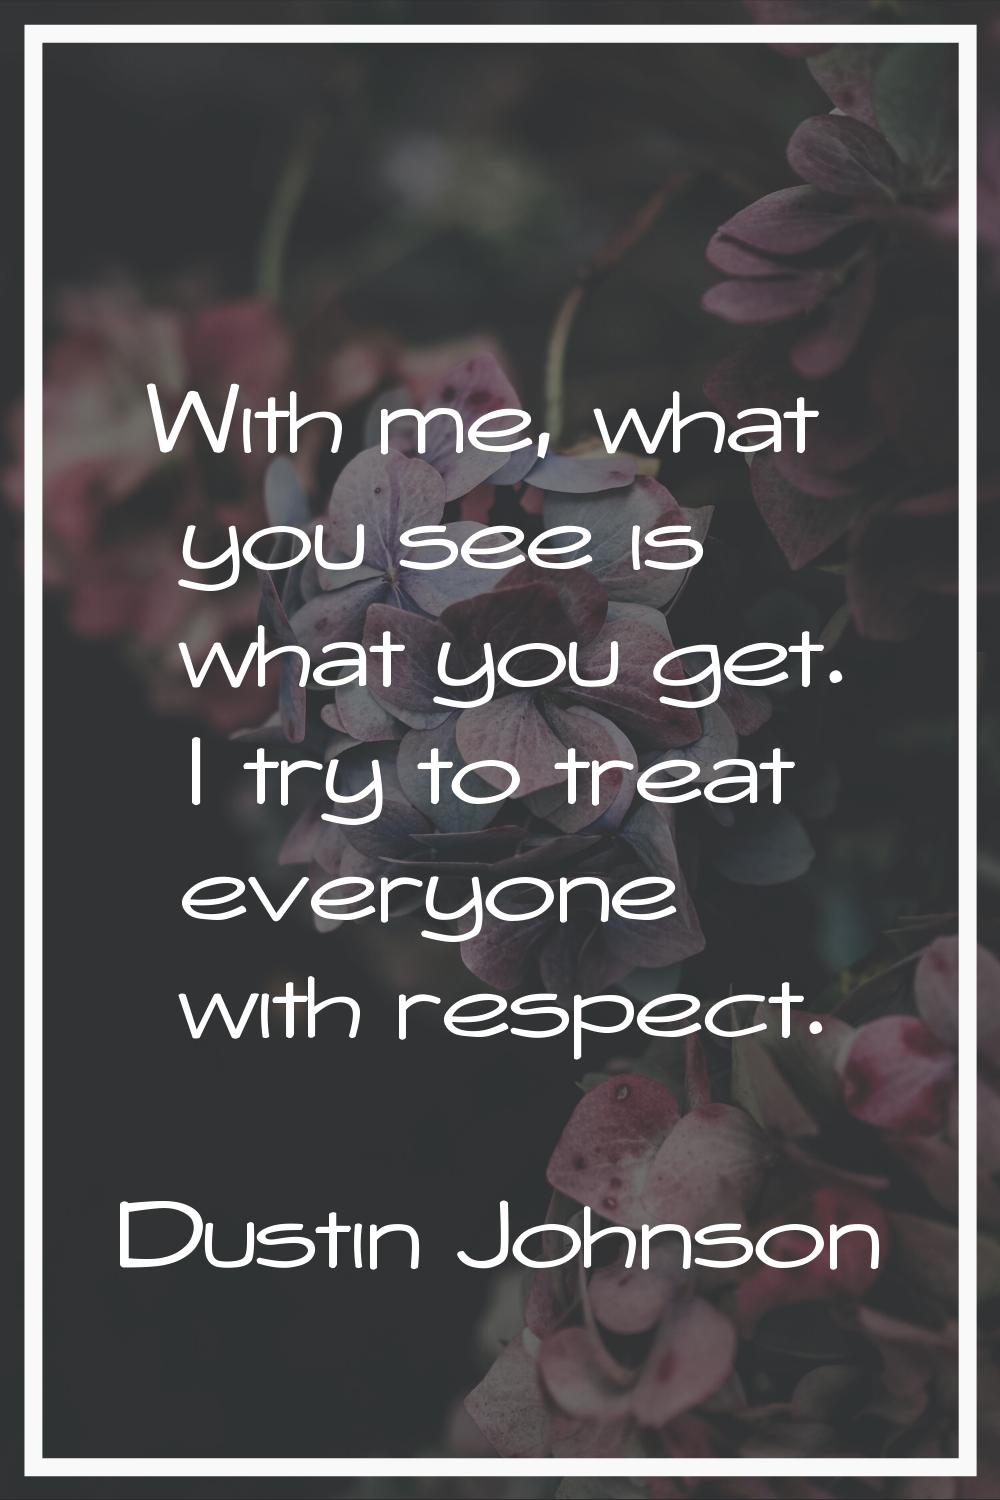 With me, what you see is what you get. I try to treat everyone with respect.